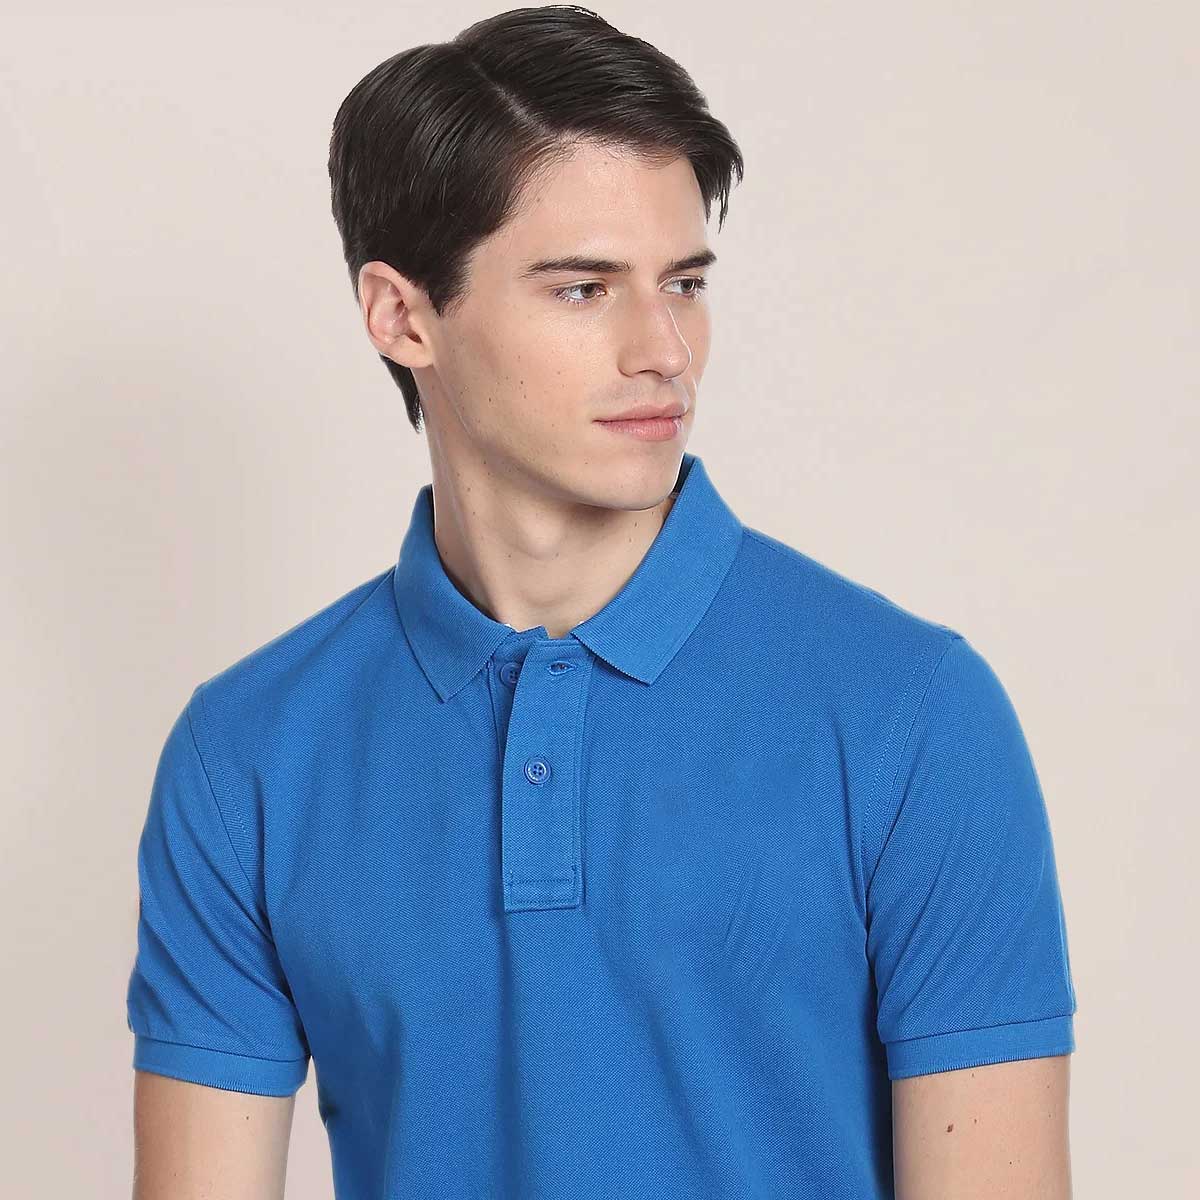 Polo Shirts Manufacturers in Durham